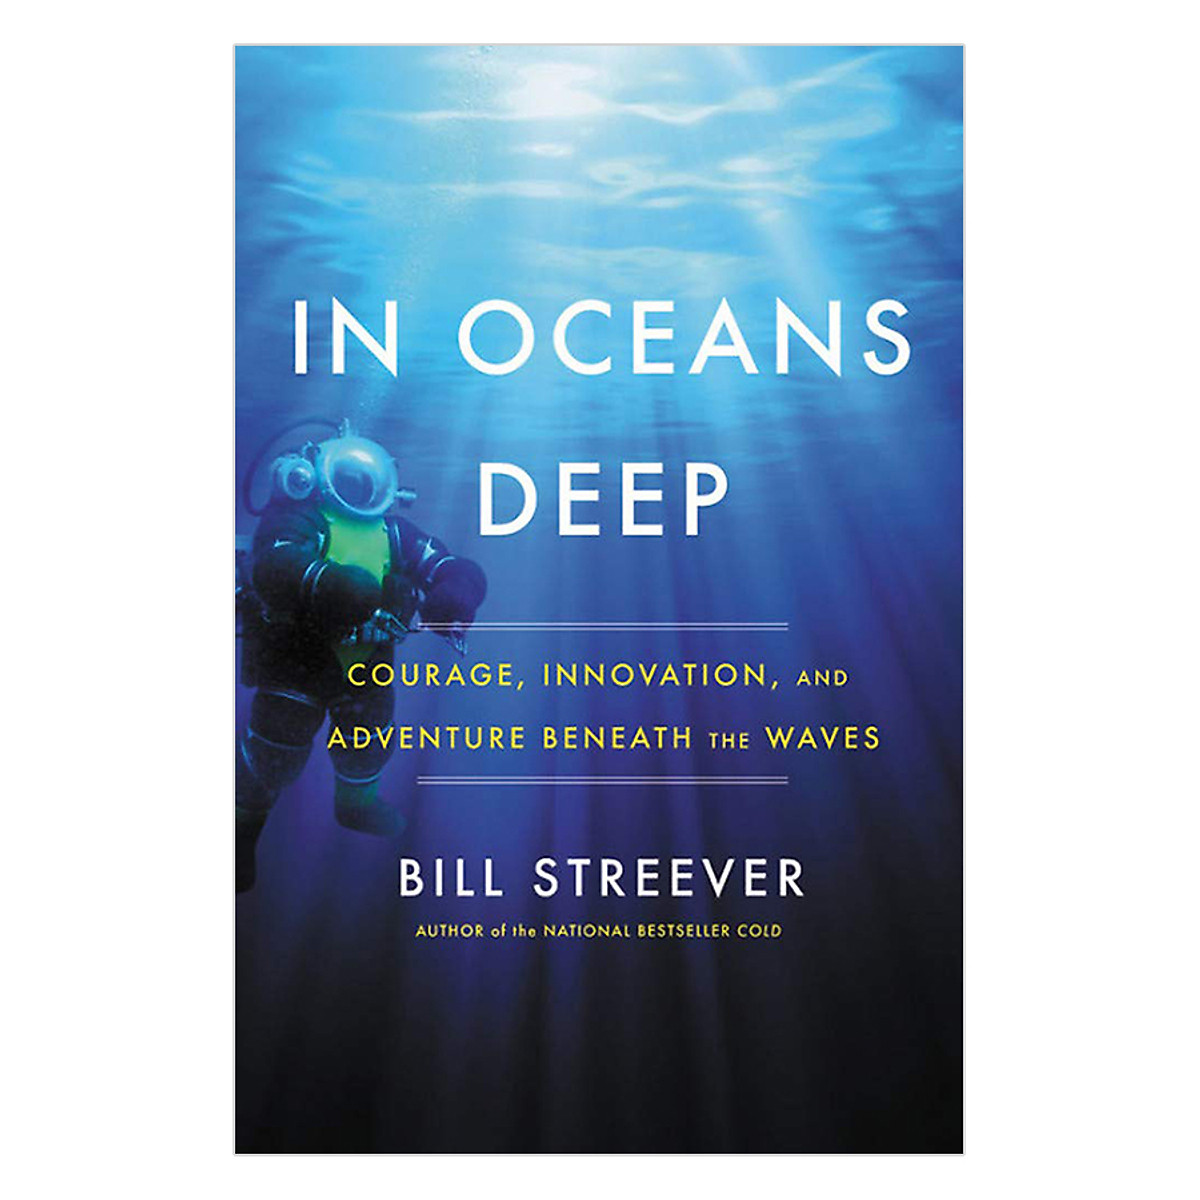 In Oceans Deep: Courage, Innovation, And Adventure Beneath The Waves